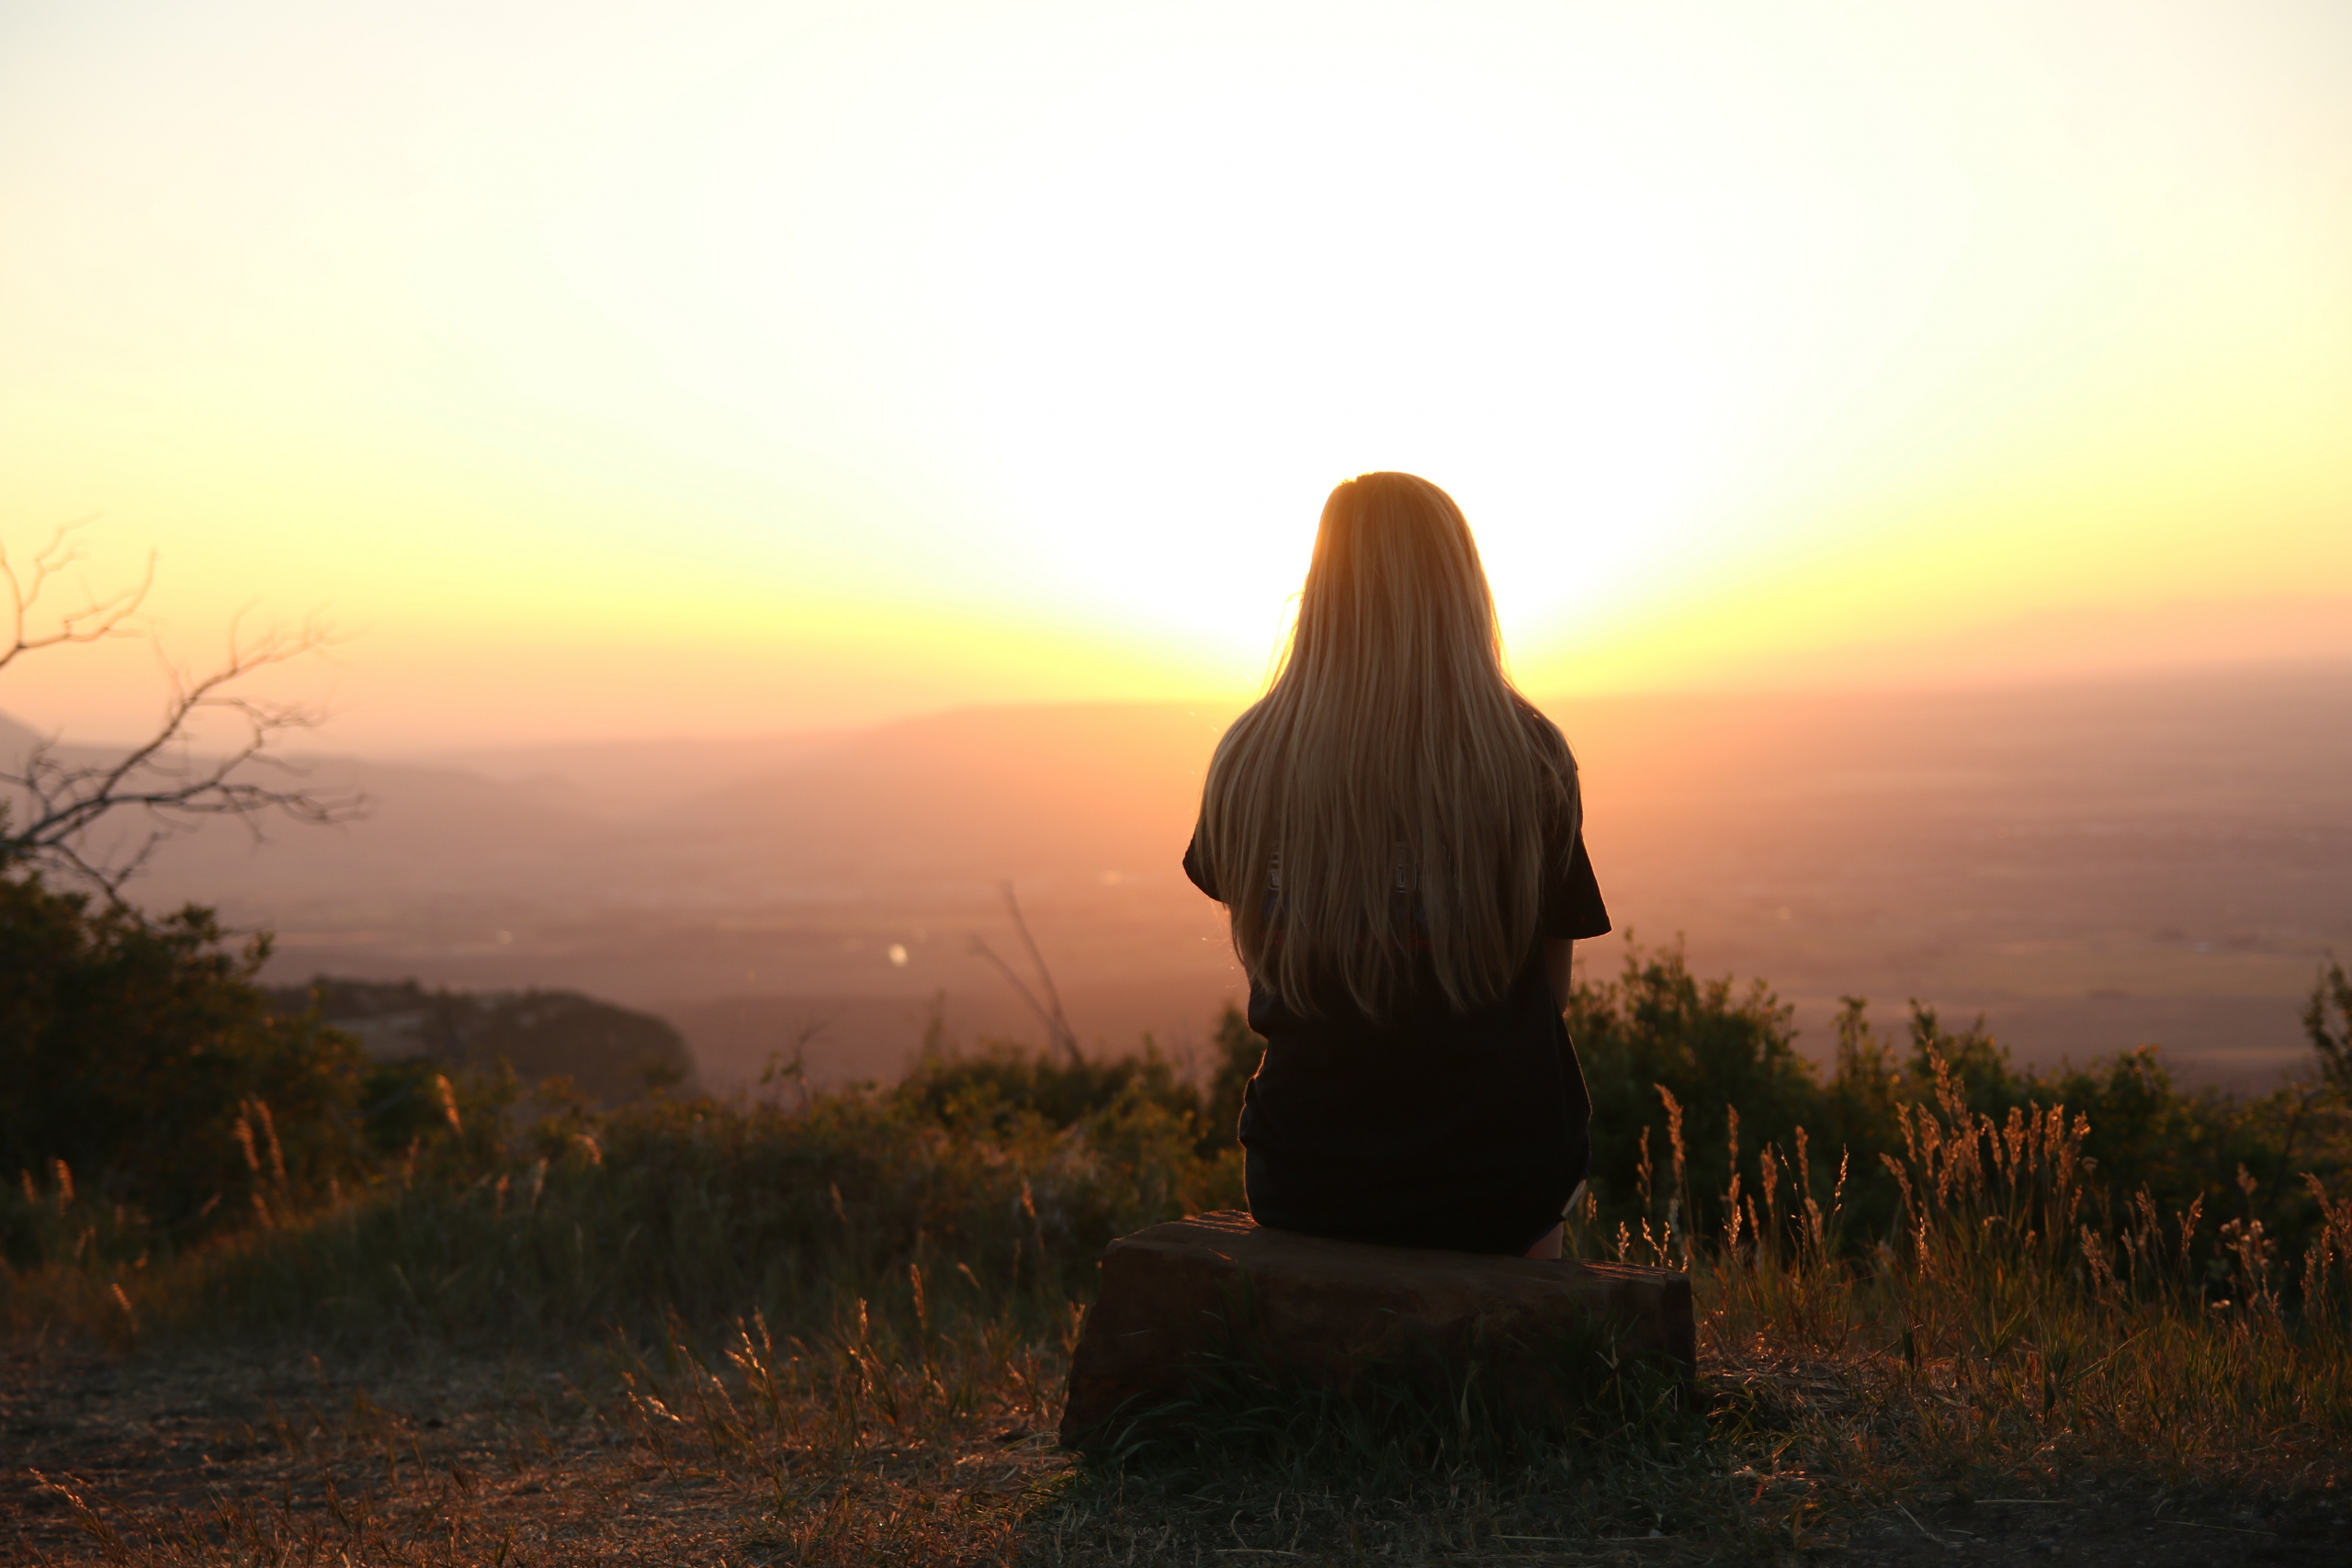 Photo of woman watching the sunset. By Pixabay. Used by permission on Pexels.